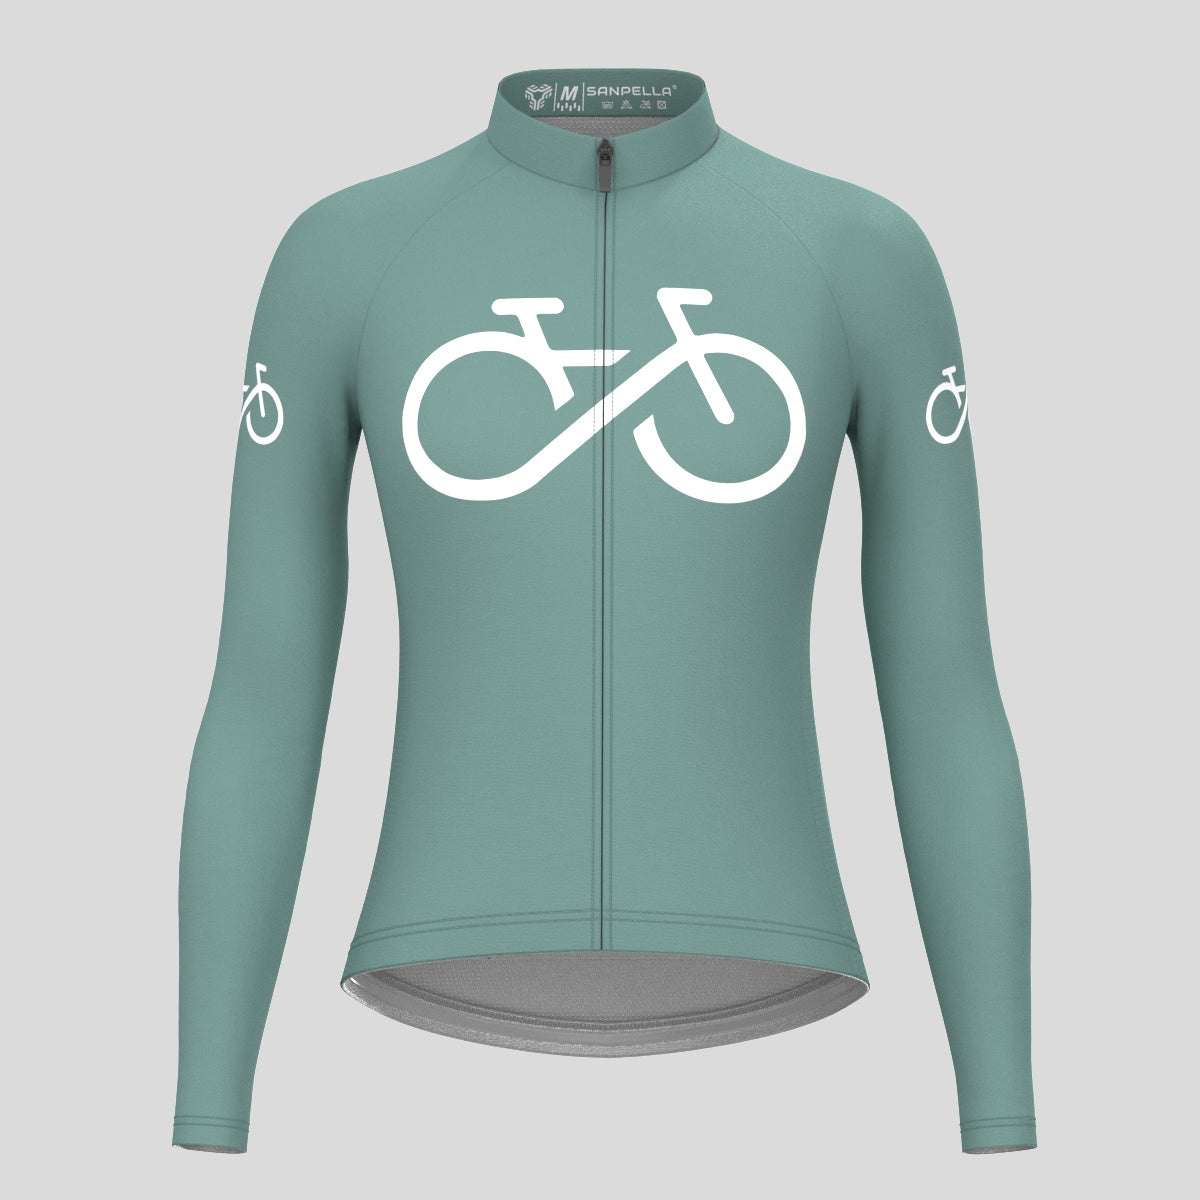 Bike Forever Women's LS Cycling Jersey - Sage